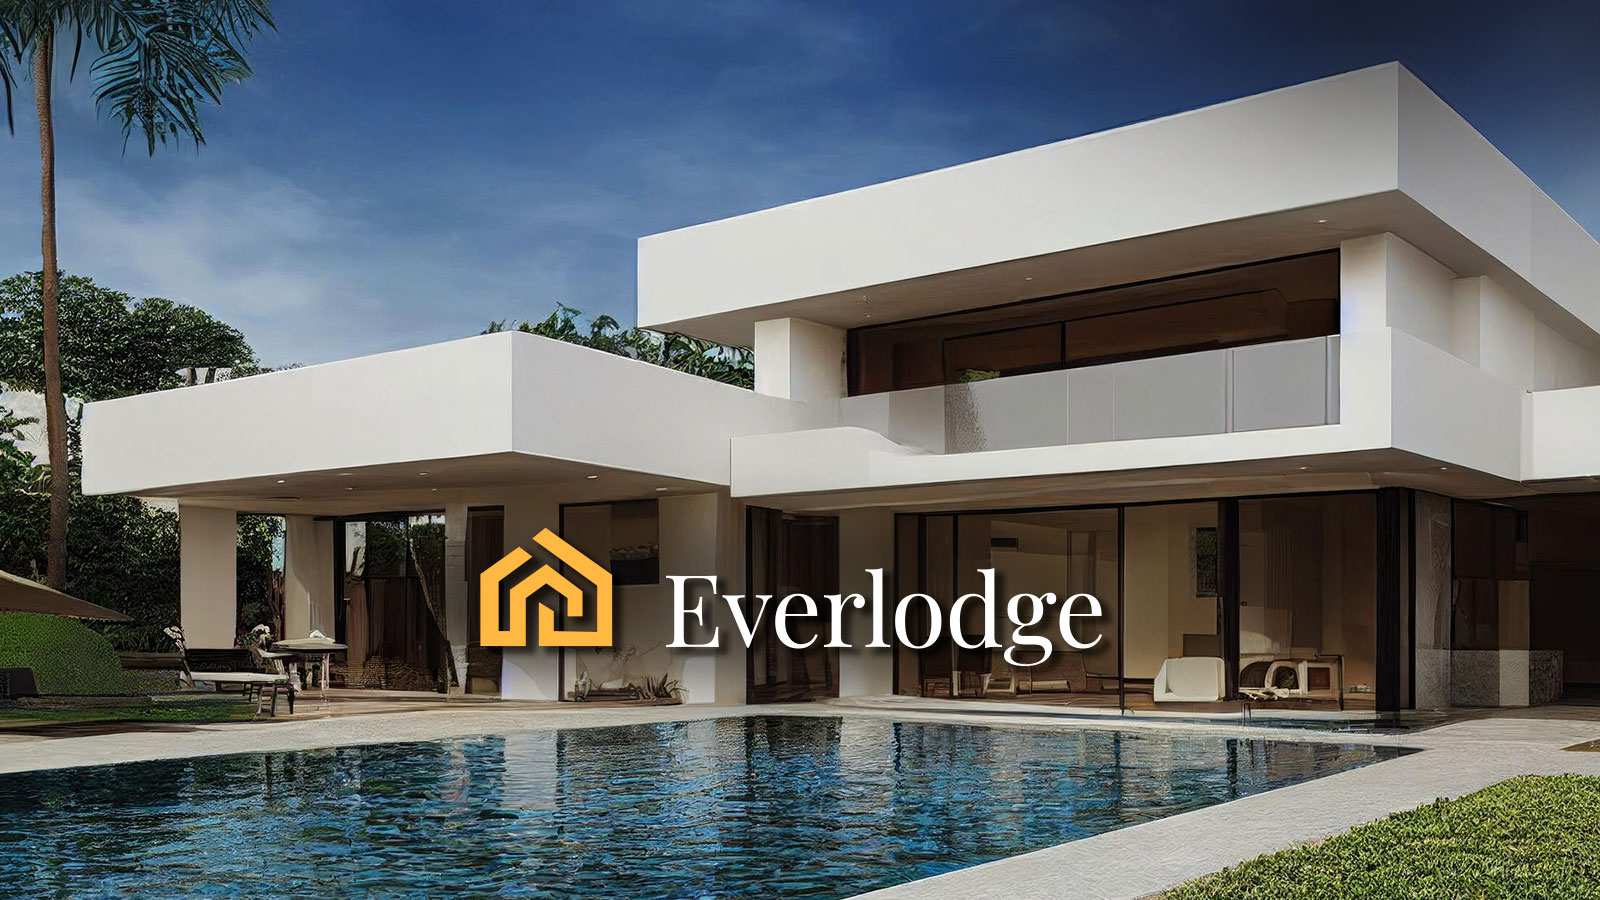 Everlodge (ELDG) Introduces New Options for Investors in August while Shiba Inu (SHIB) and Maker (MKR) Growing Yet Again